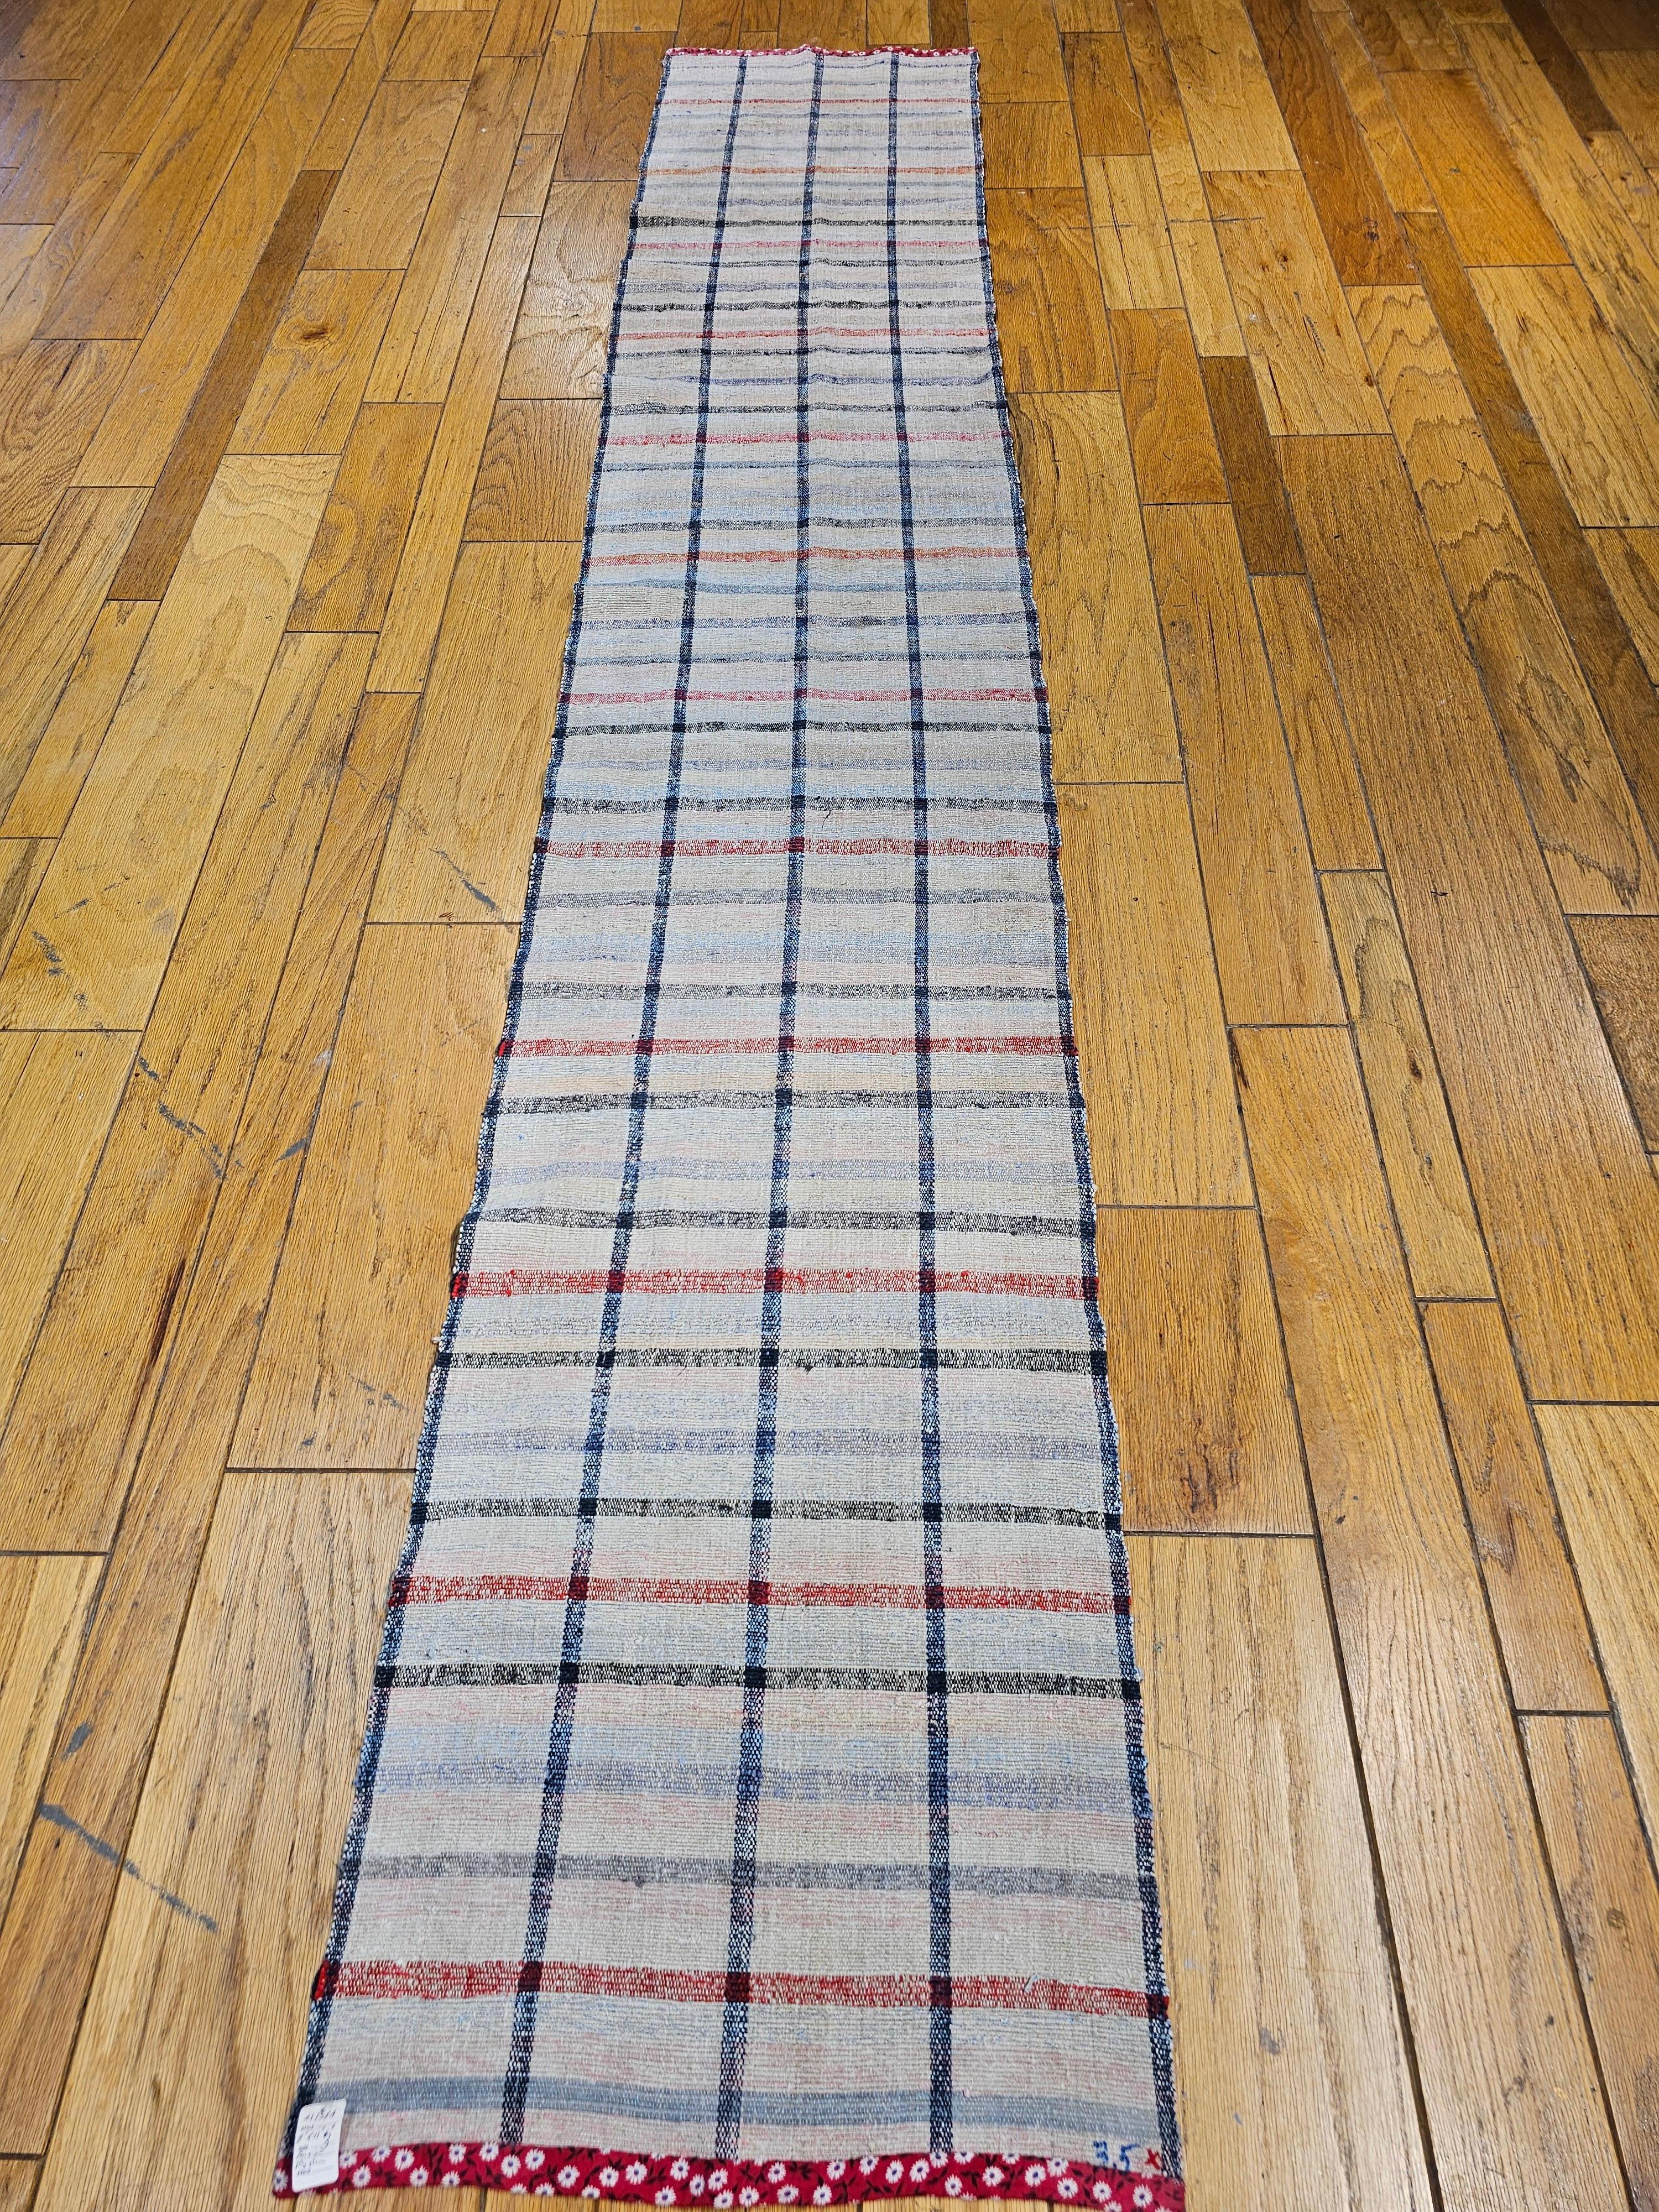  The vintage American Rag Runner has a cream color with primary stripes in indigo blue and red and secondary stripes in pale green and pink colors.  The rag runner has an identical pair (SKU 1758B).  They can be bought individually or as a pair.  